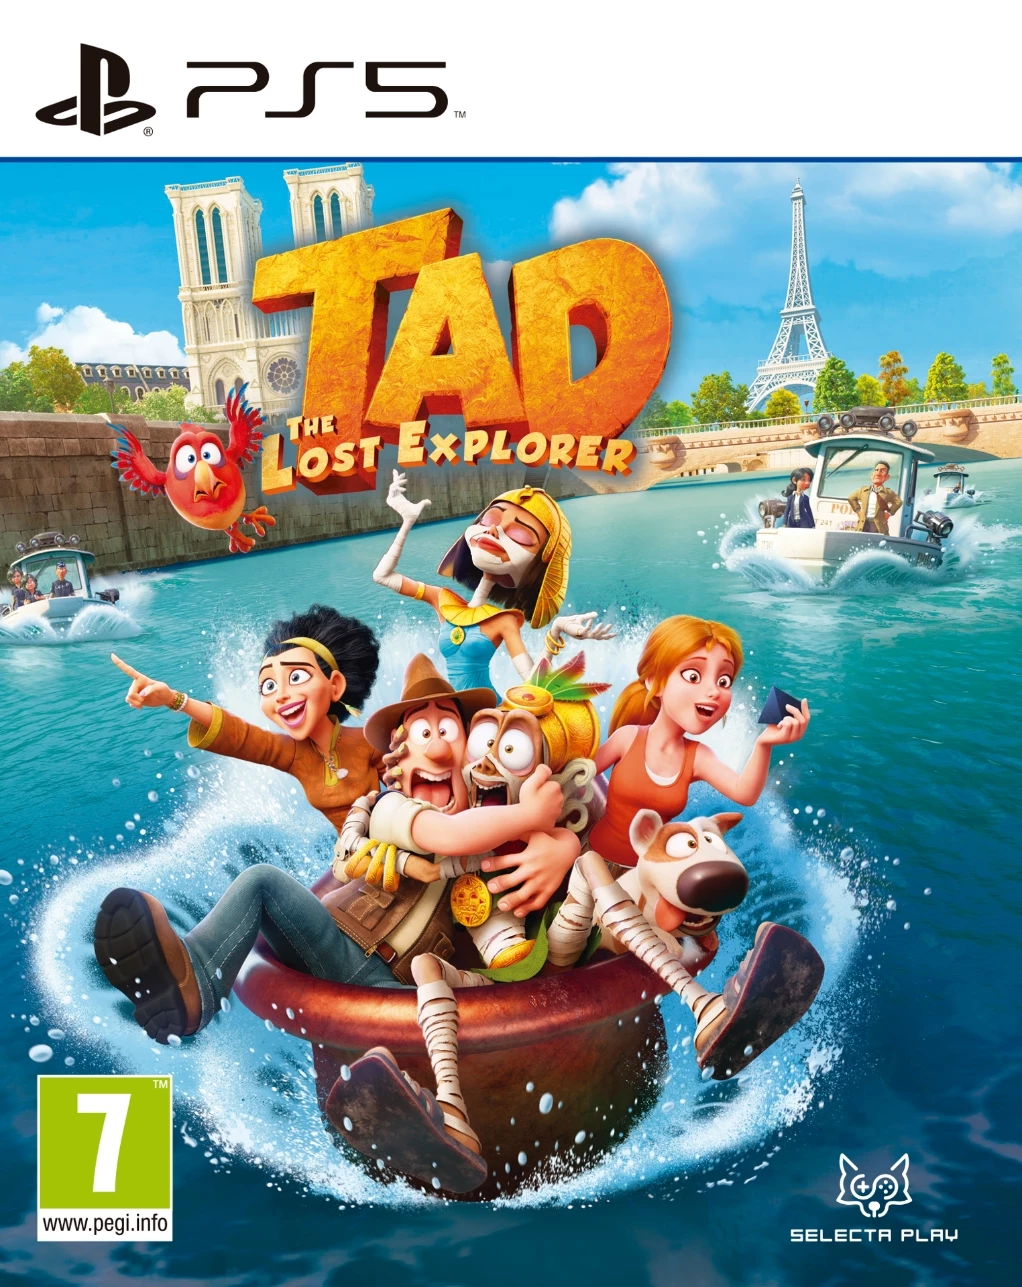 Tad the Lost Explorer (PS5), Selecta Play